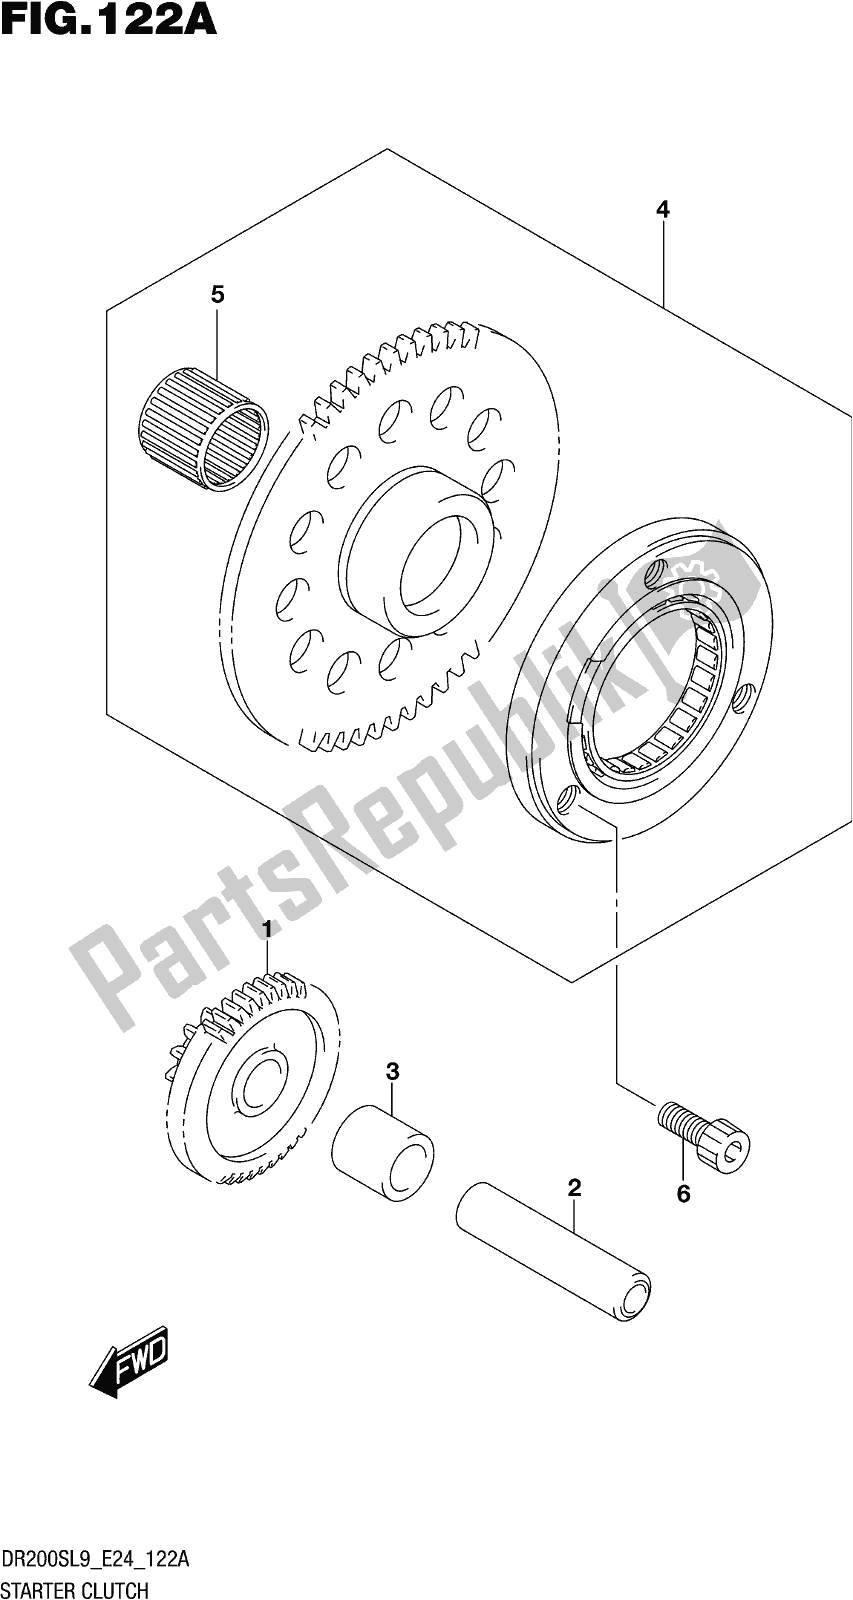 All parts for the Fig. 122a Starter Clutch of the Suzuki DR 200S 2019